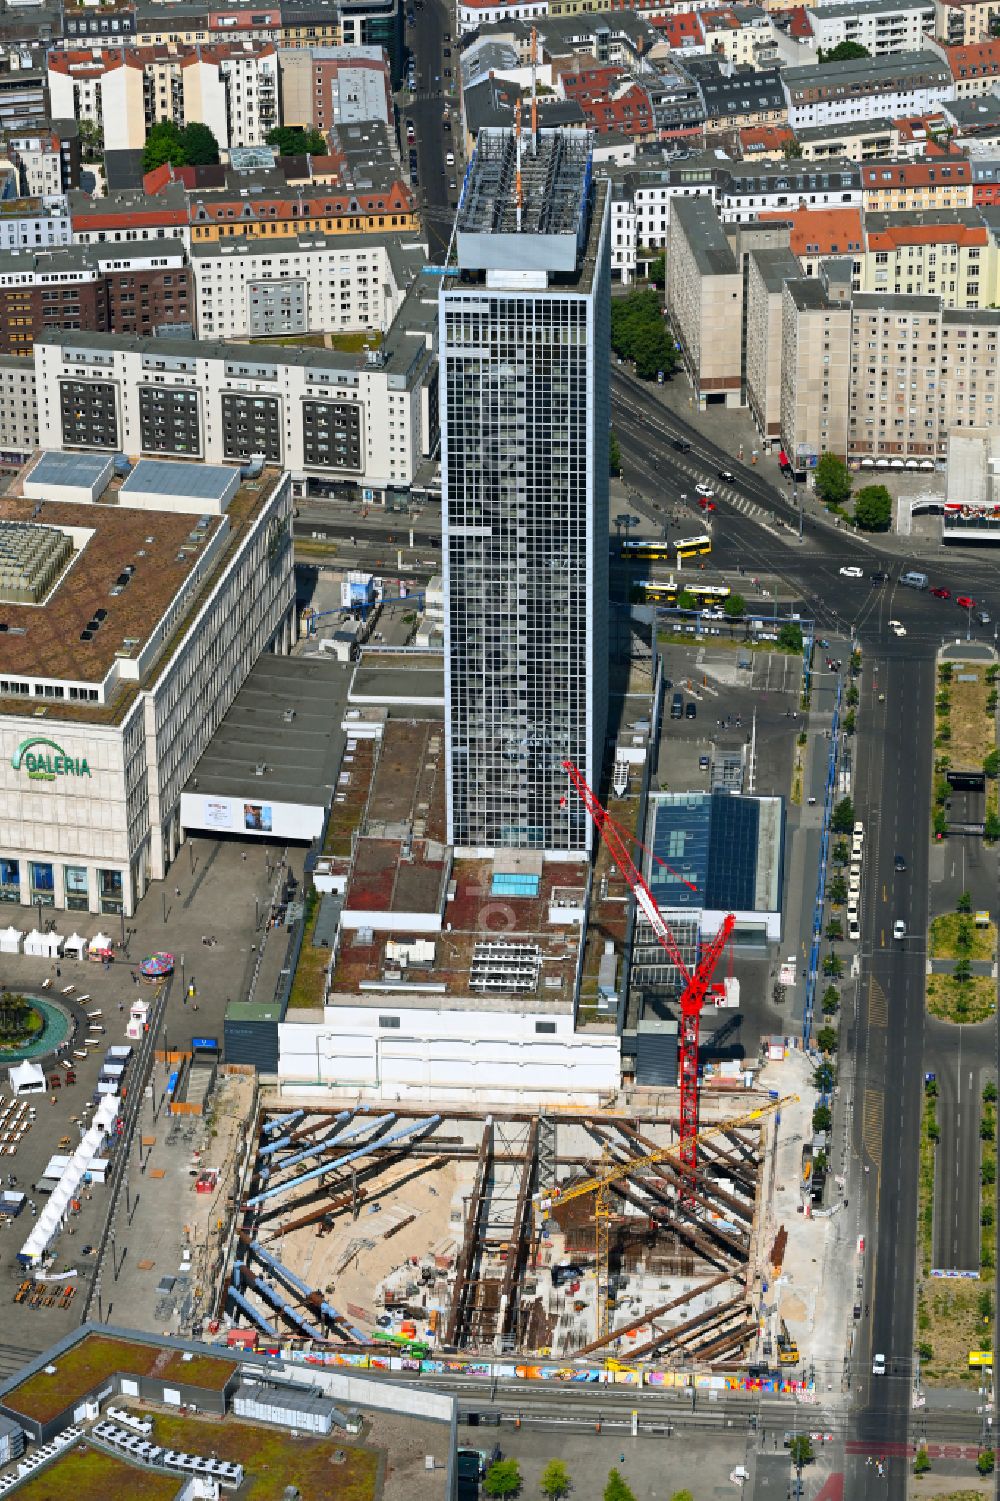 Aerial image Berlin - Construction site for the new construction of the high-rise building complex ALX (also called twin towers) of the twin towers at Alexanderplatz on Alexanderstrasse in the Mitte district in Berlin, Germany